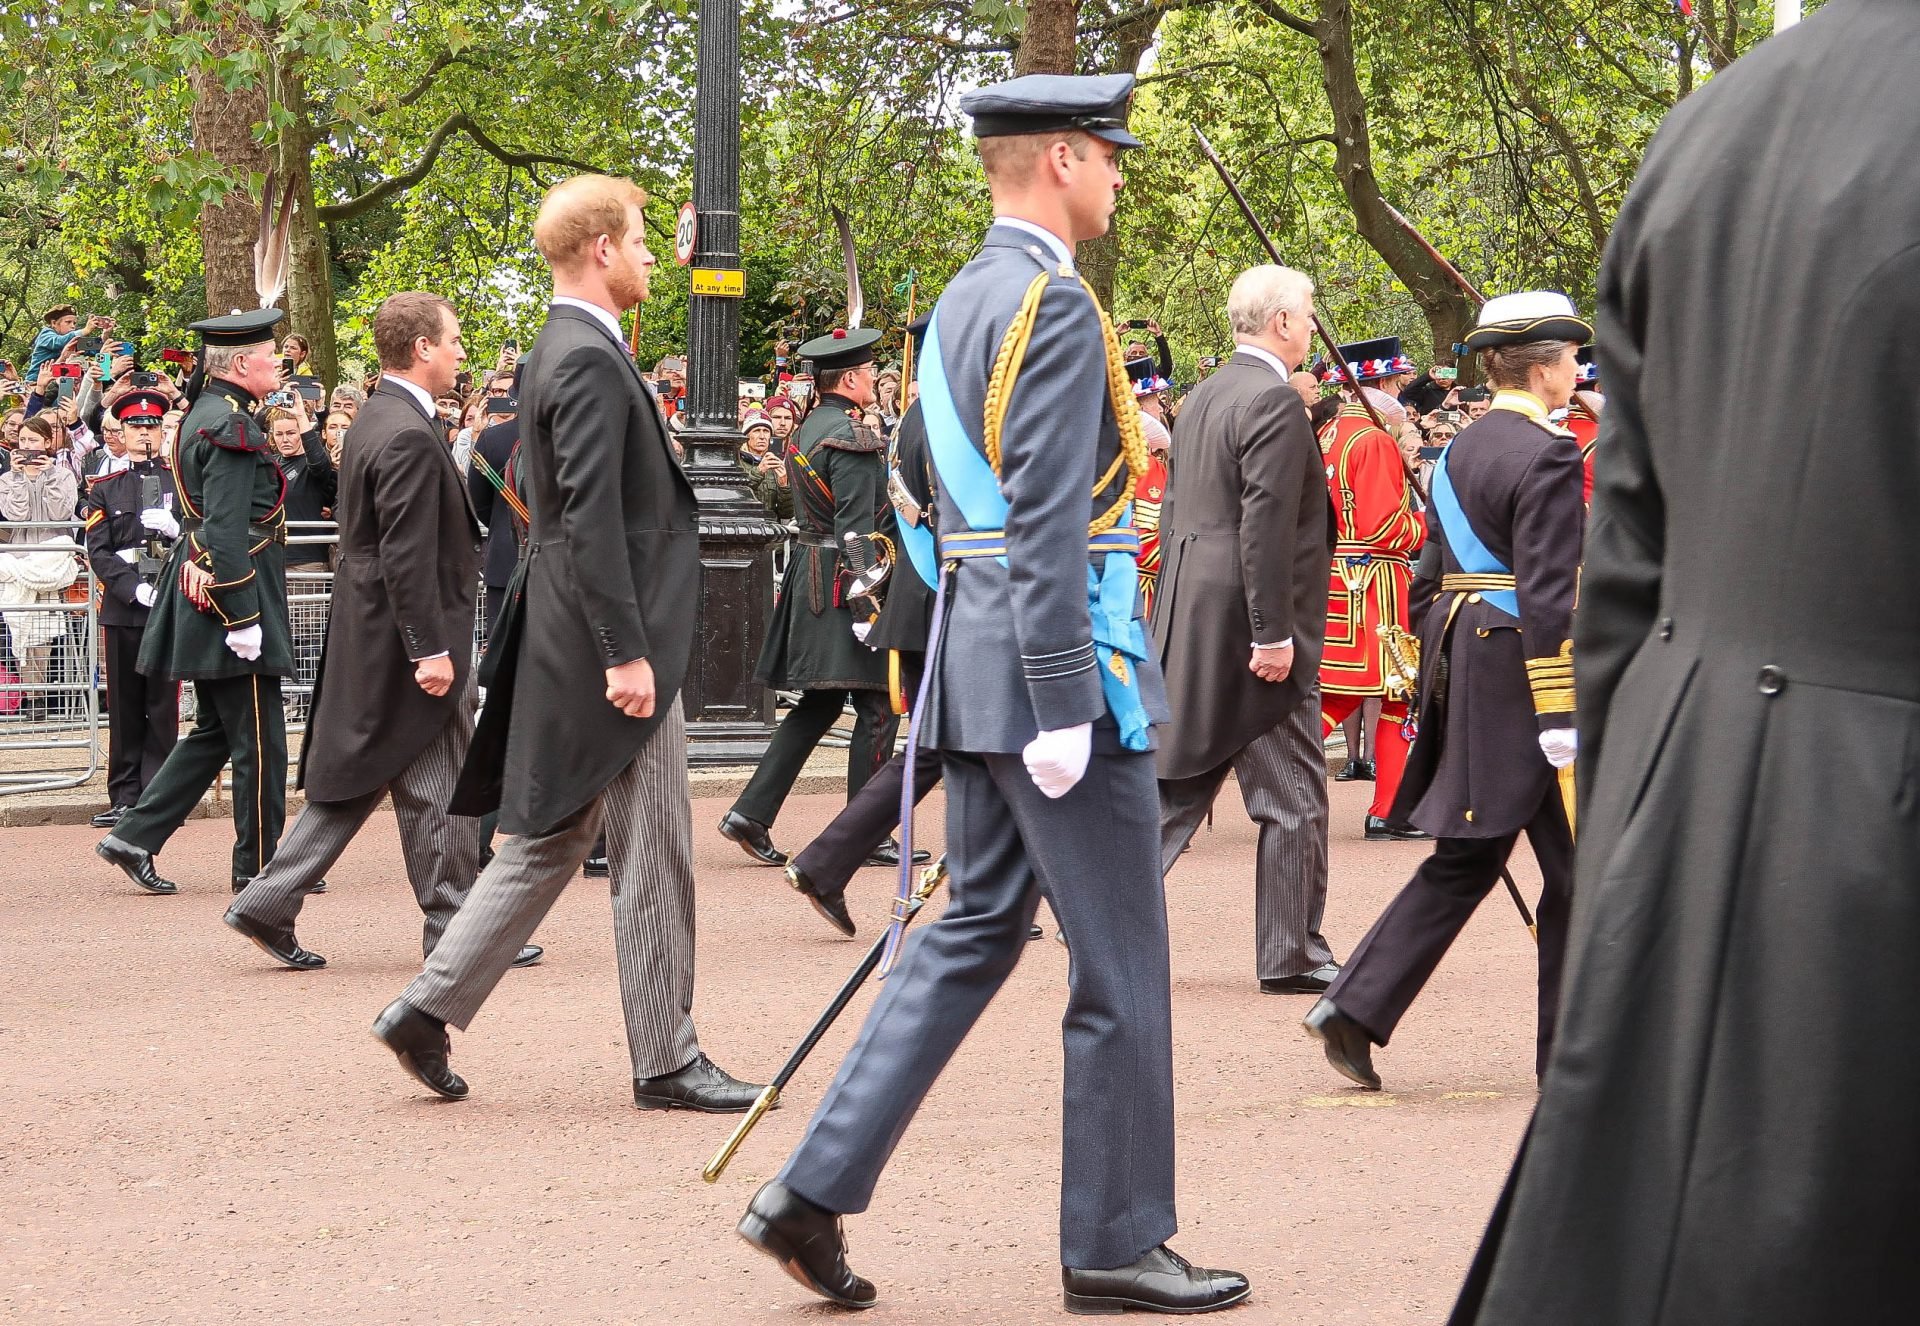 Members of the Royal Family walk in the procession following Queen Elizabeth II's funeral. Prince Harry is the second from the left.